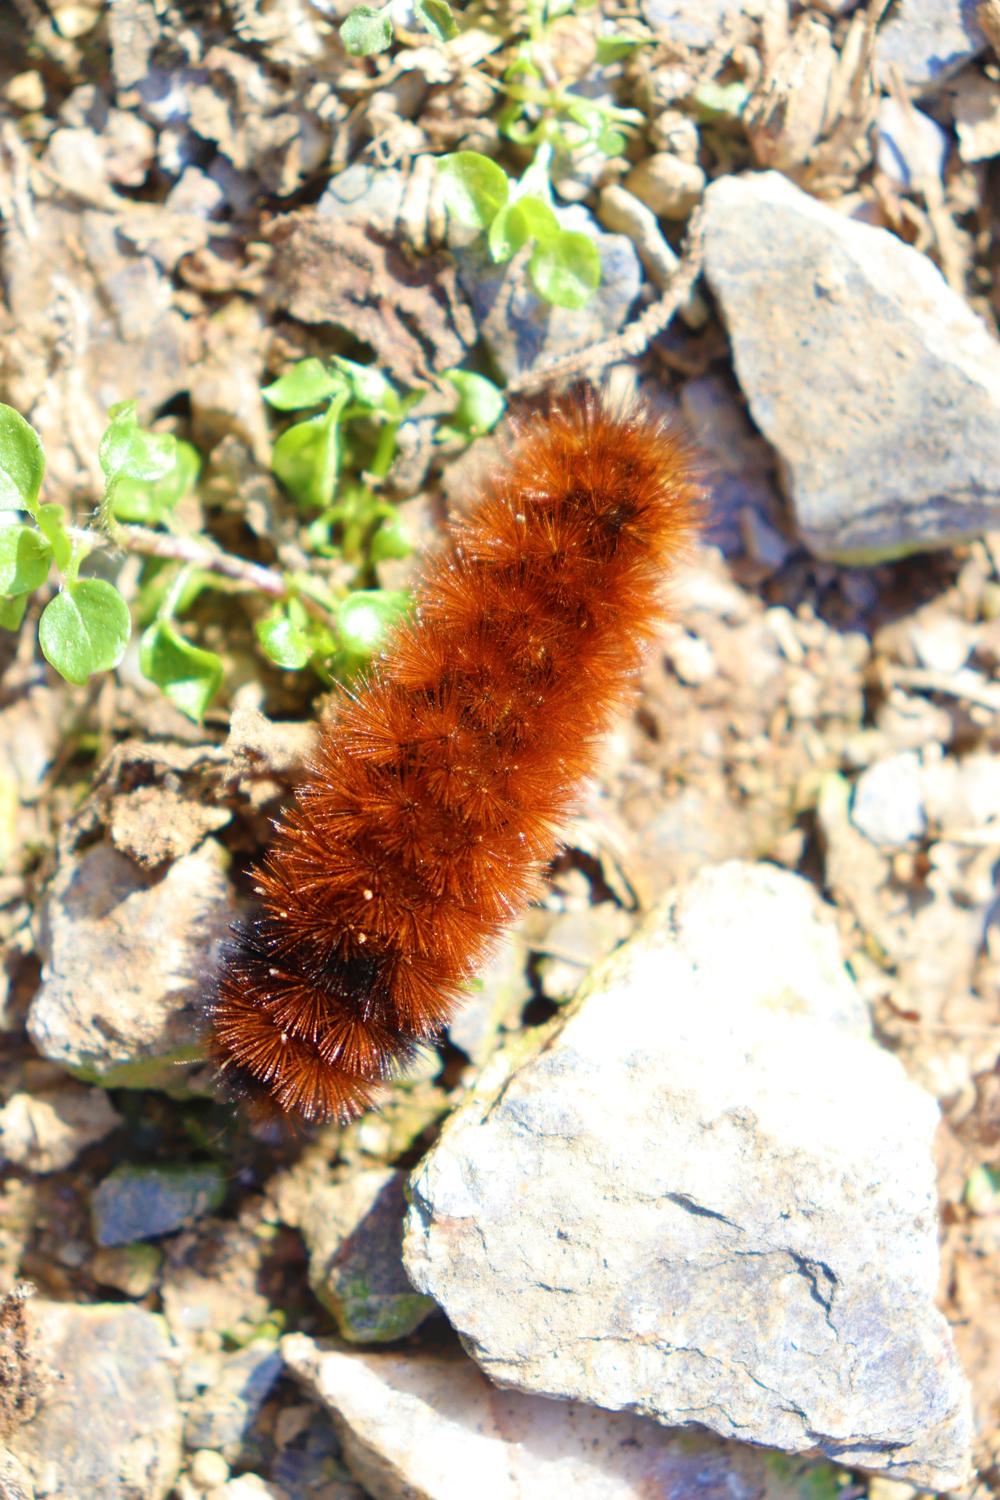 Facts About Wooly Worms